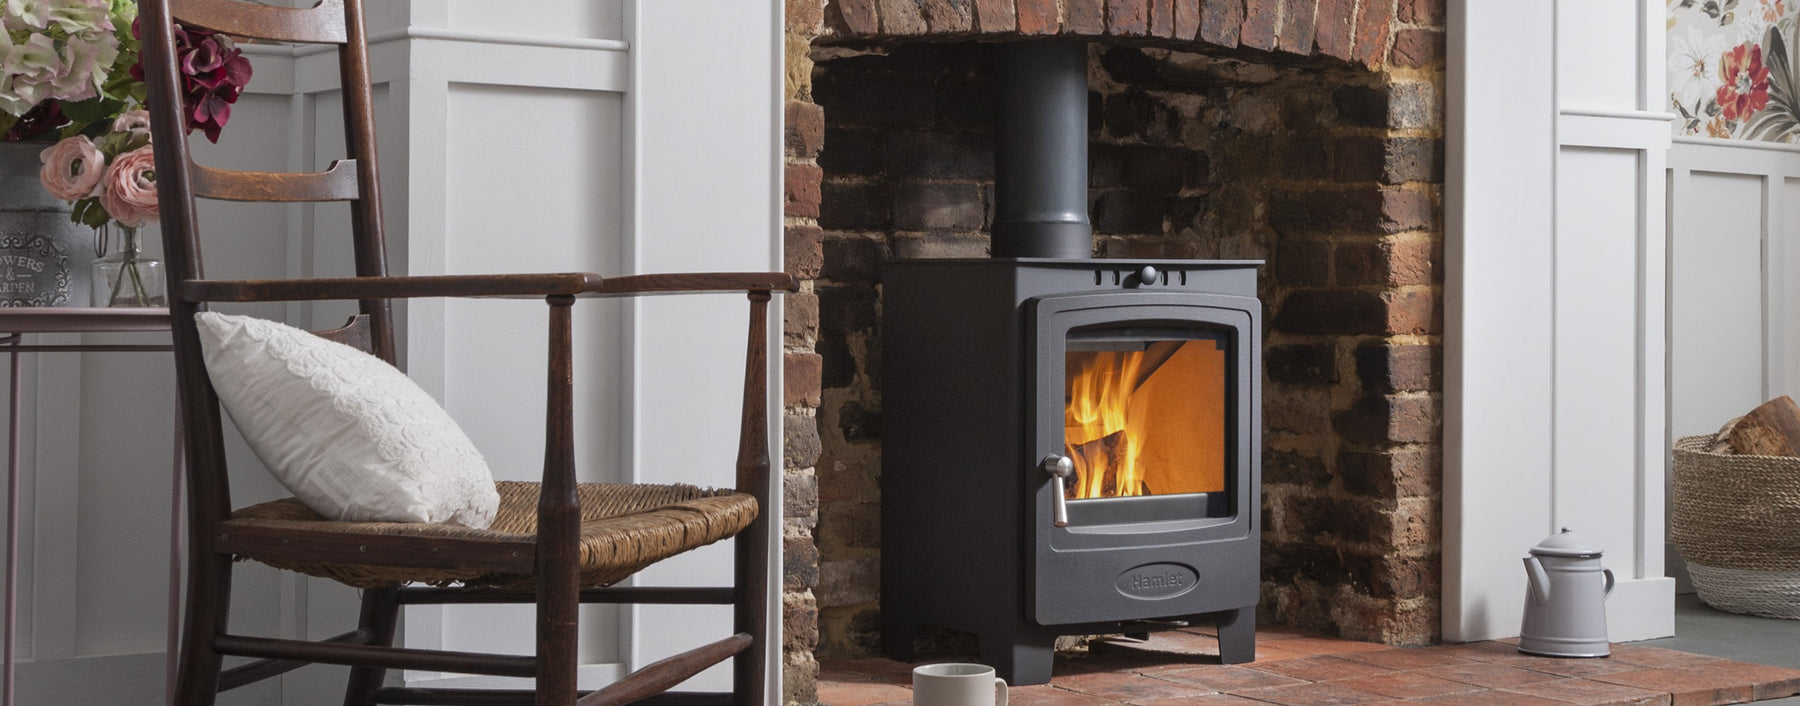 Wood-Burning Stoves and the Dangers of Carbon Monoxide Poisoning